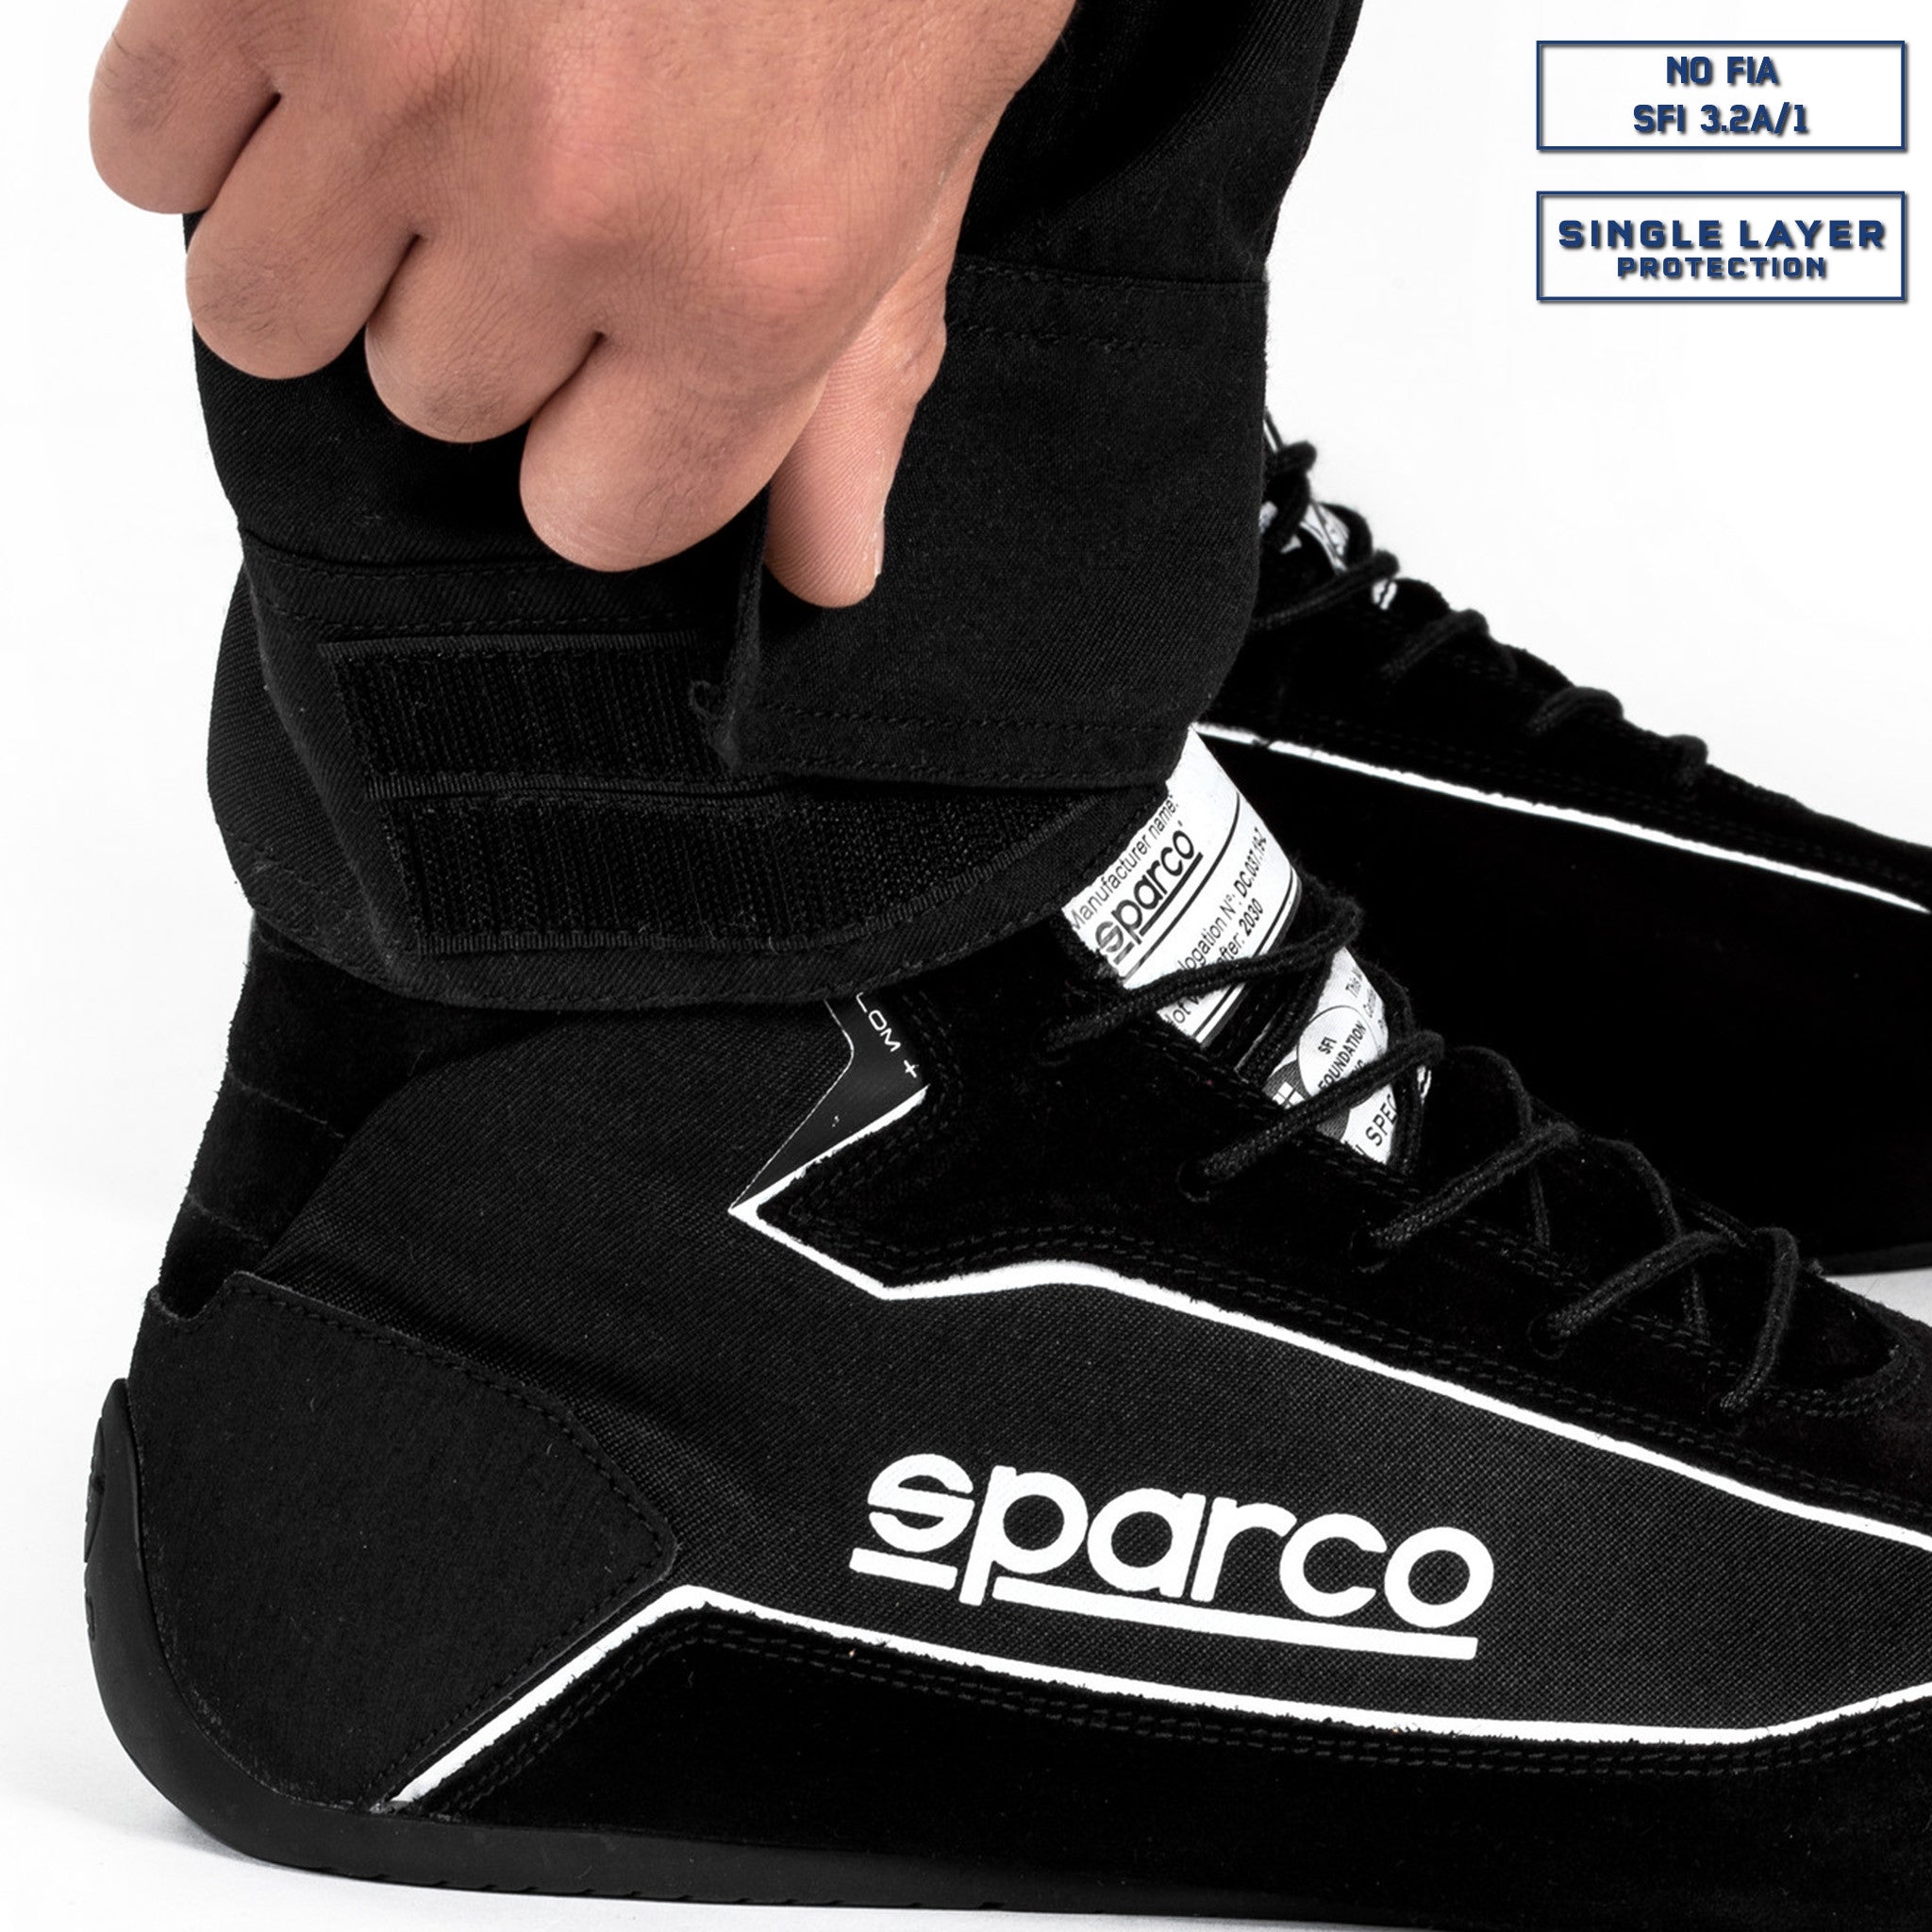 ONE - Sparco Shop